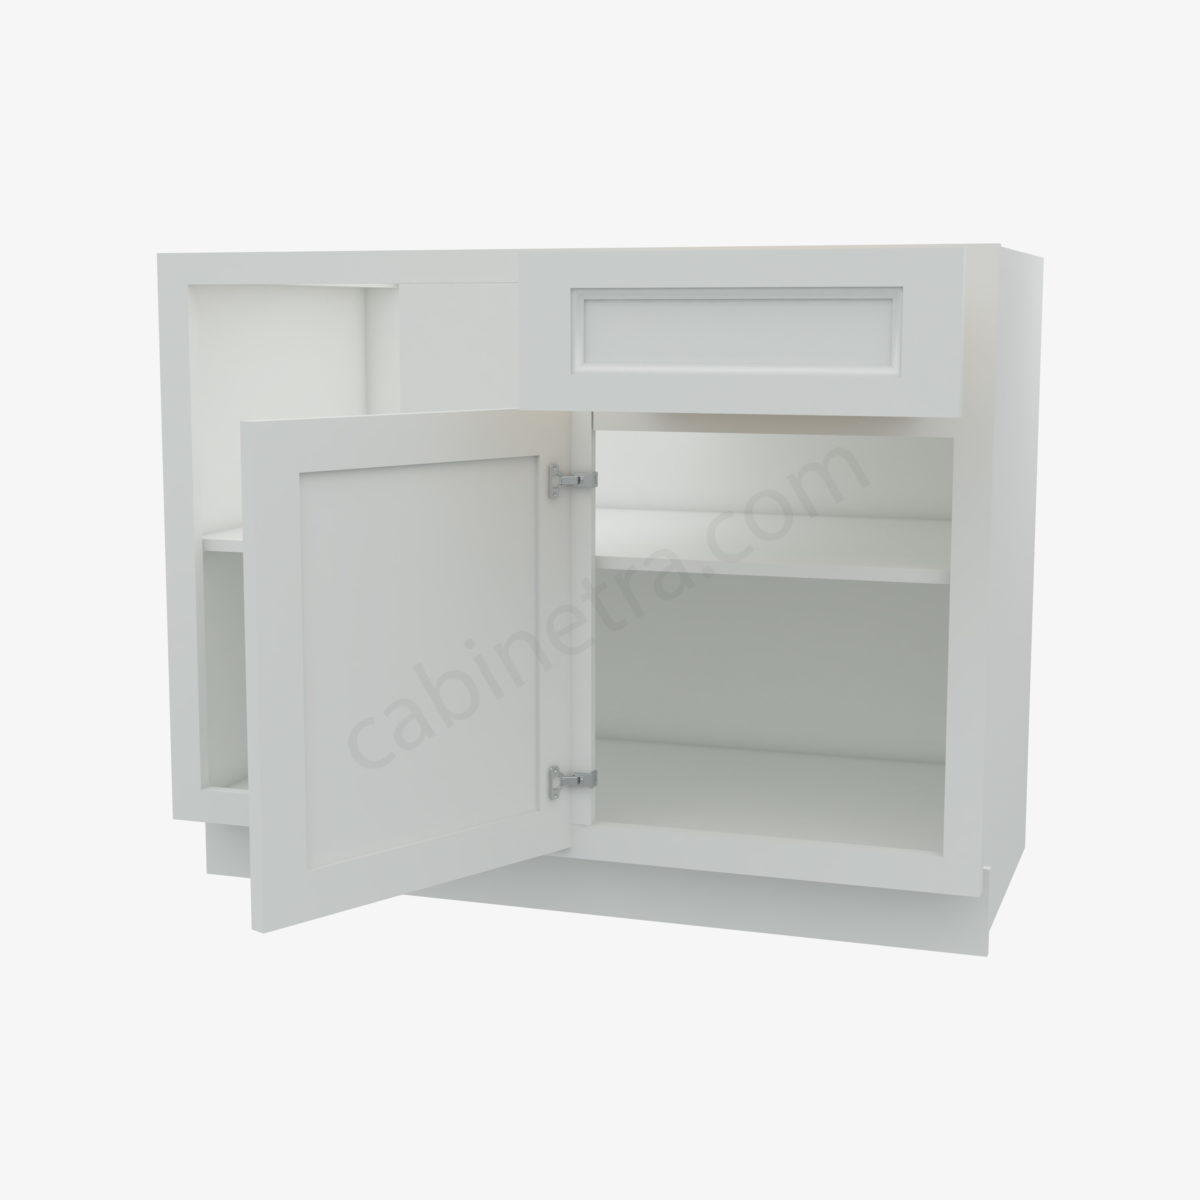 TW BBLC45 48 42W 5 Forevermark Uptown White Cabinetra scaled